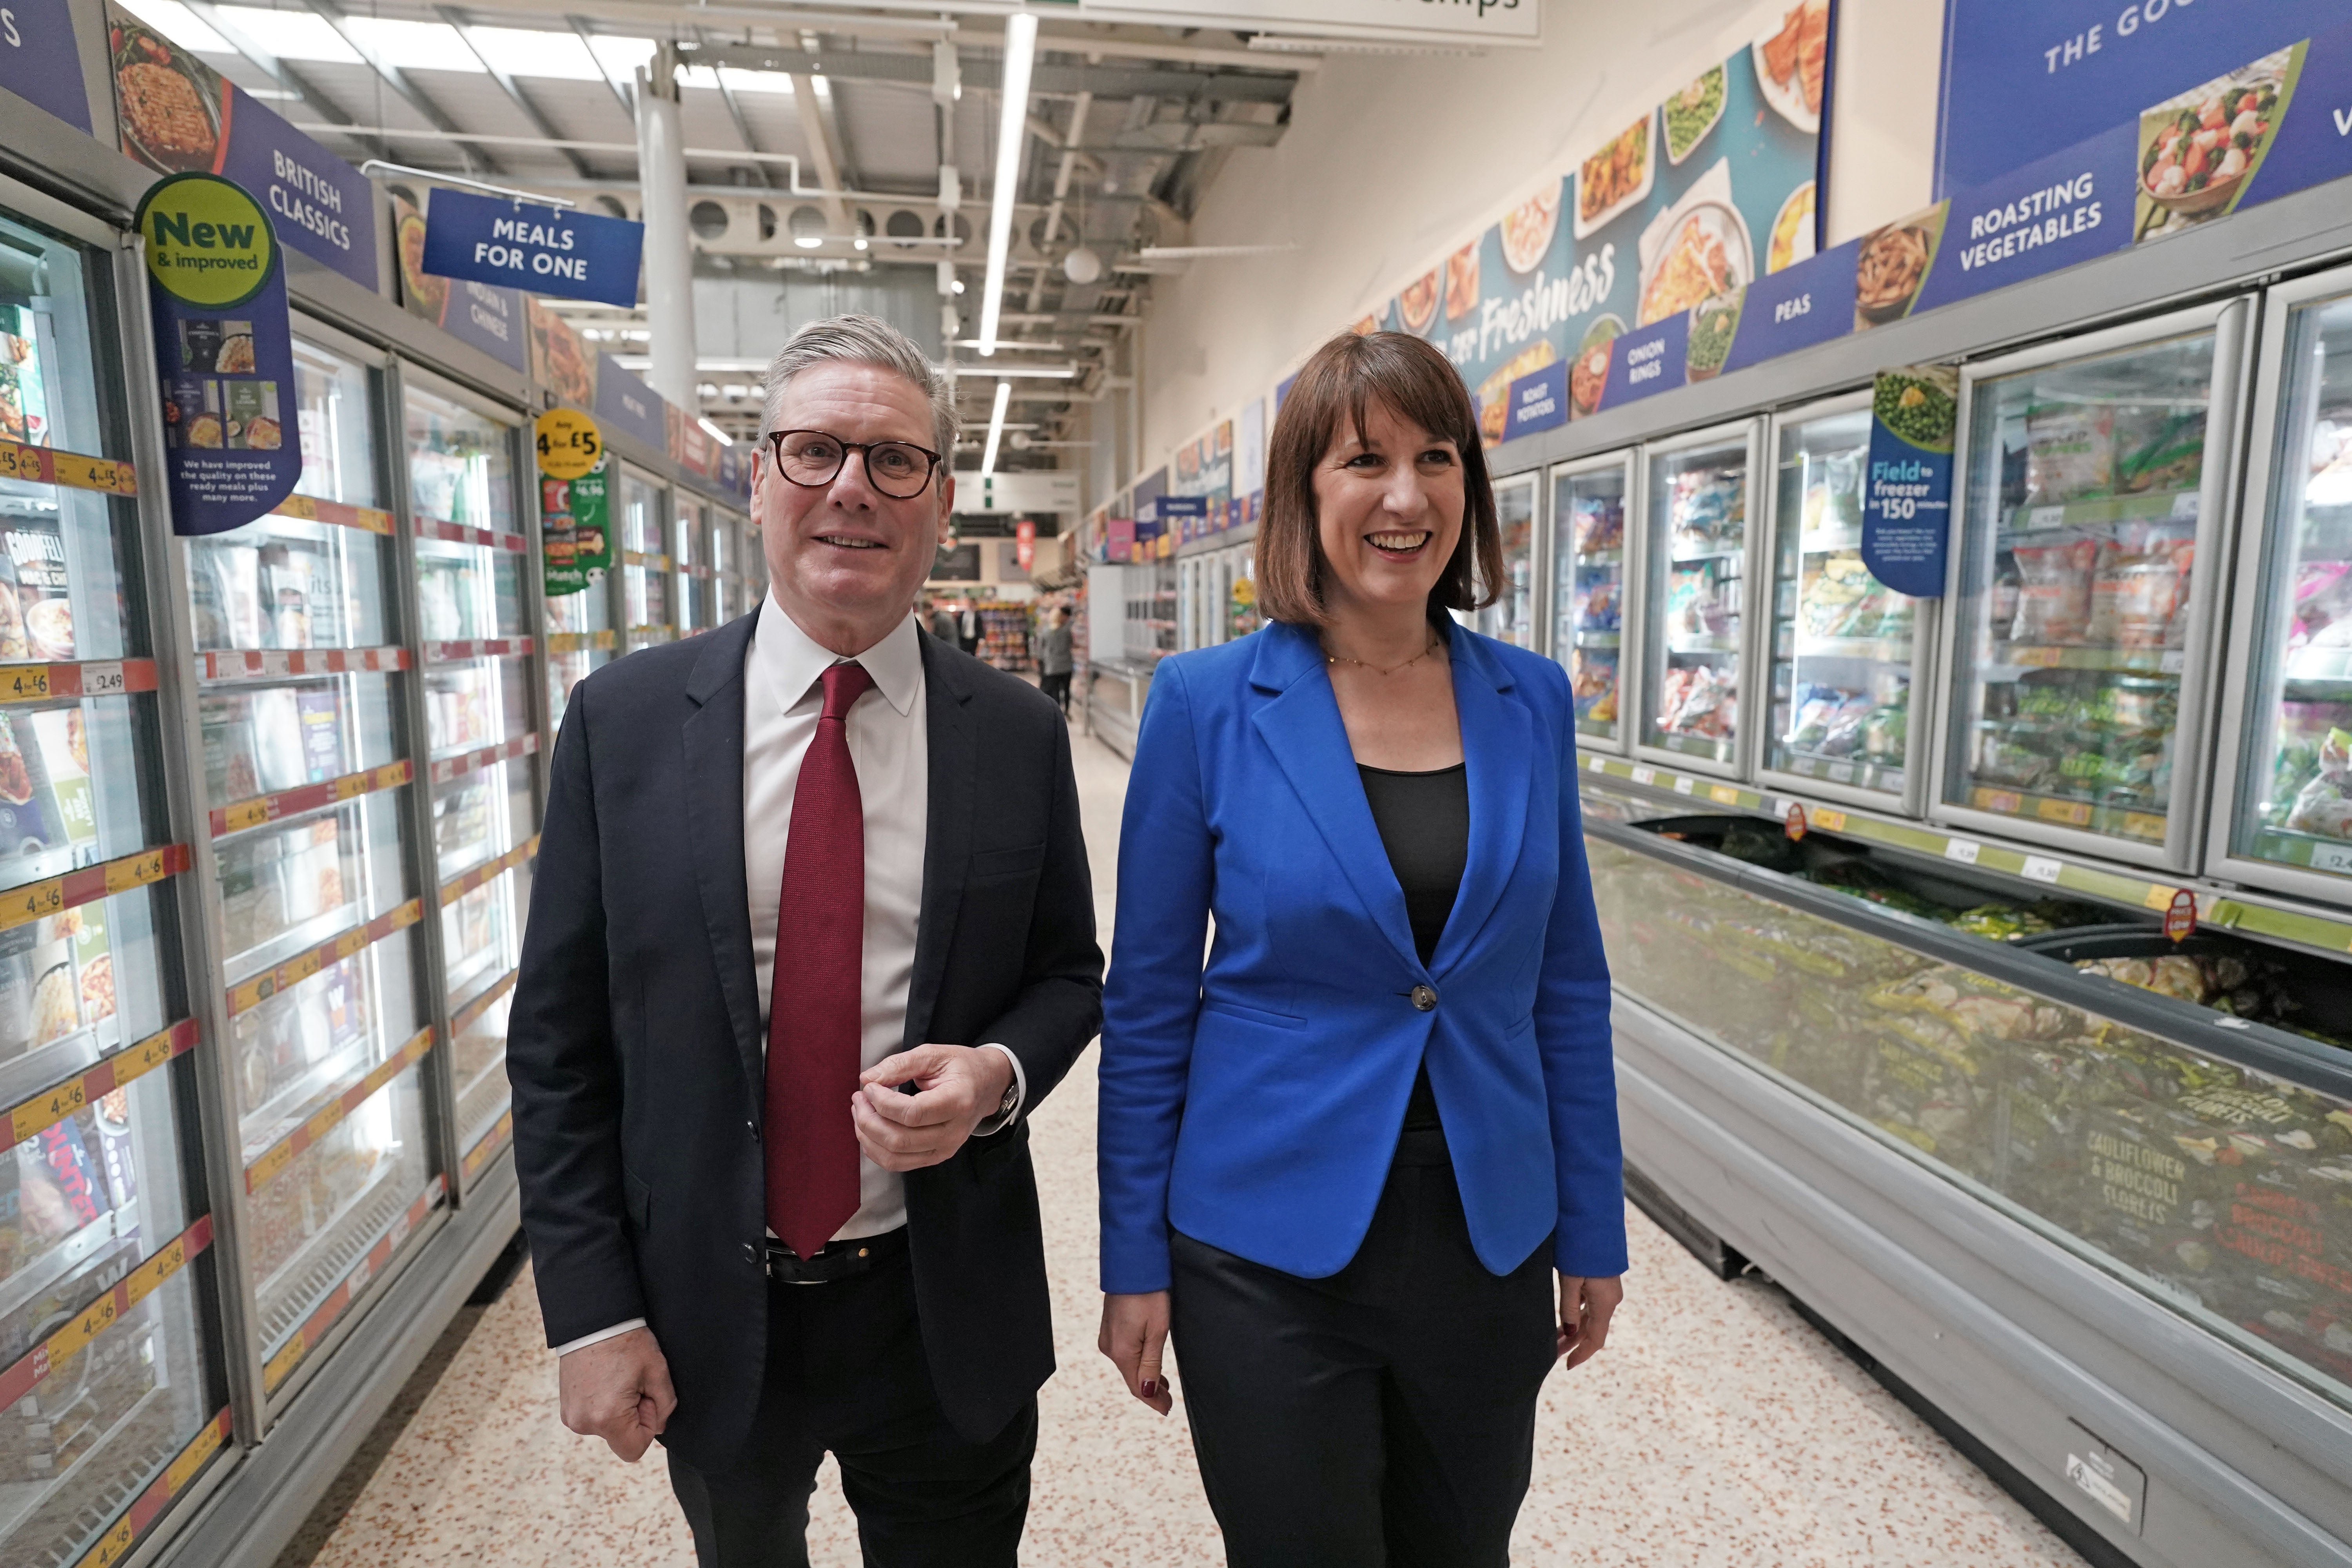 Labor Party leader Sir Keir Starmer and shadow chancellor Rachel Reeves during a visit to Morrisons in Wiltshire